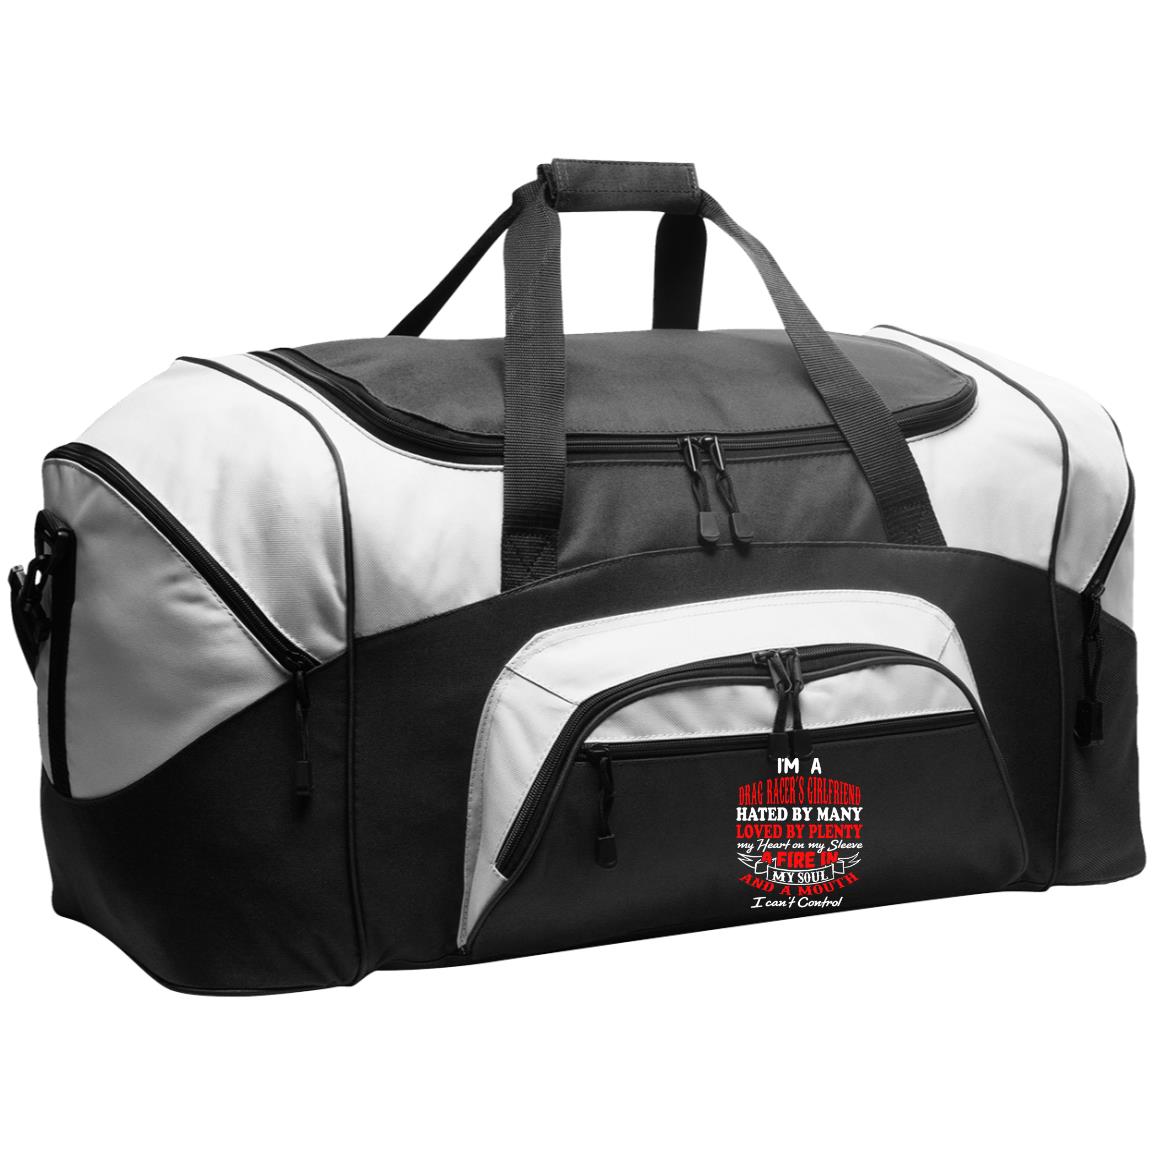 I'm A Drag Racer's Girlfriend Hated By Many Loved By Plenty Colorblock Sport Duffel